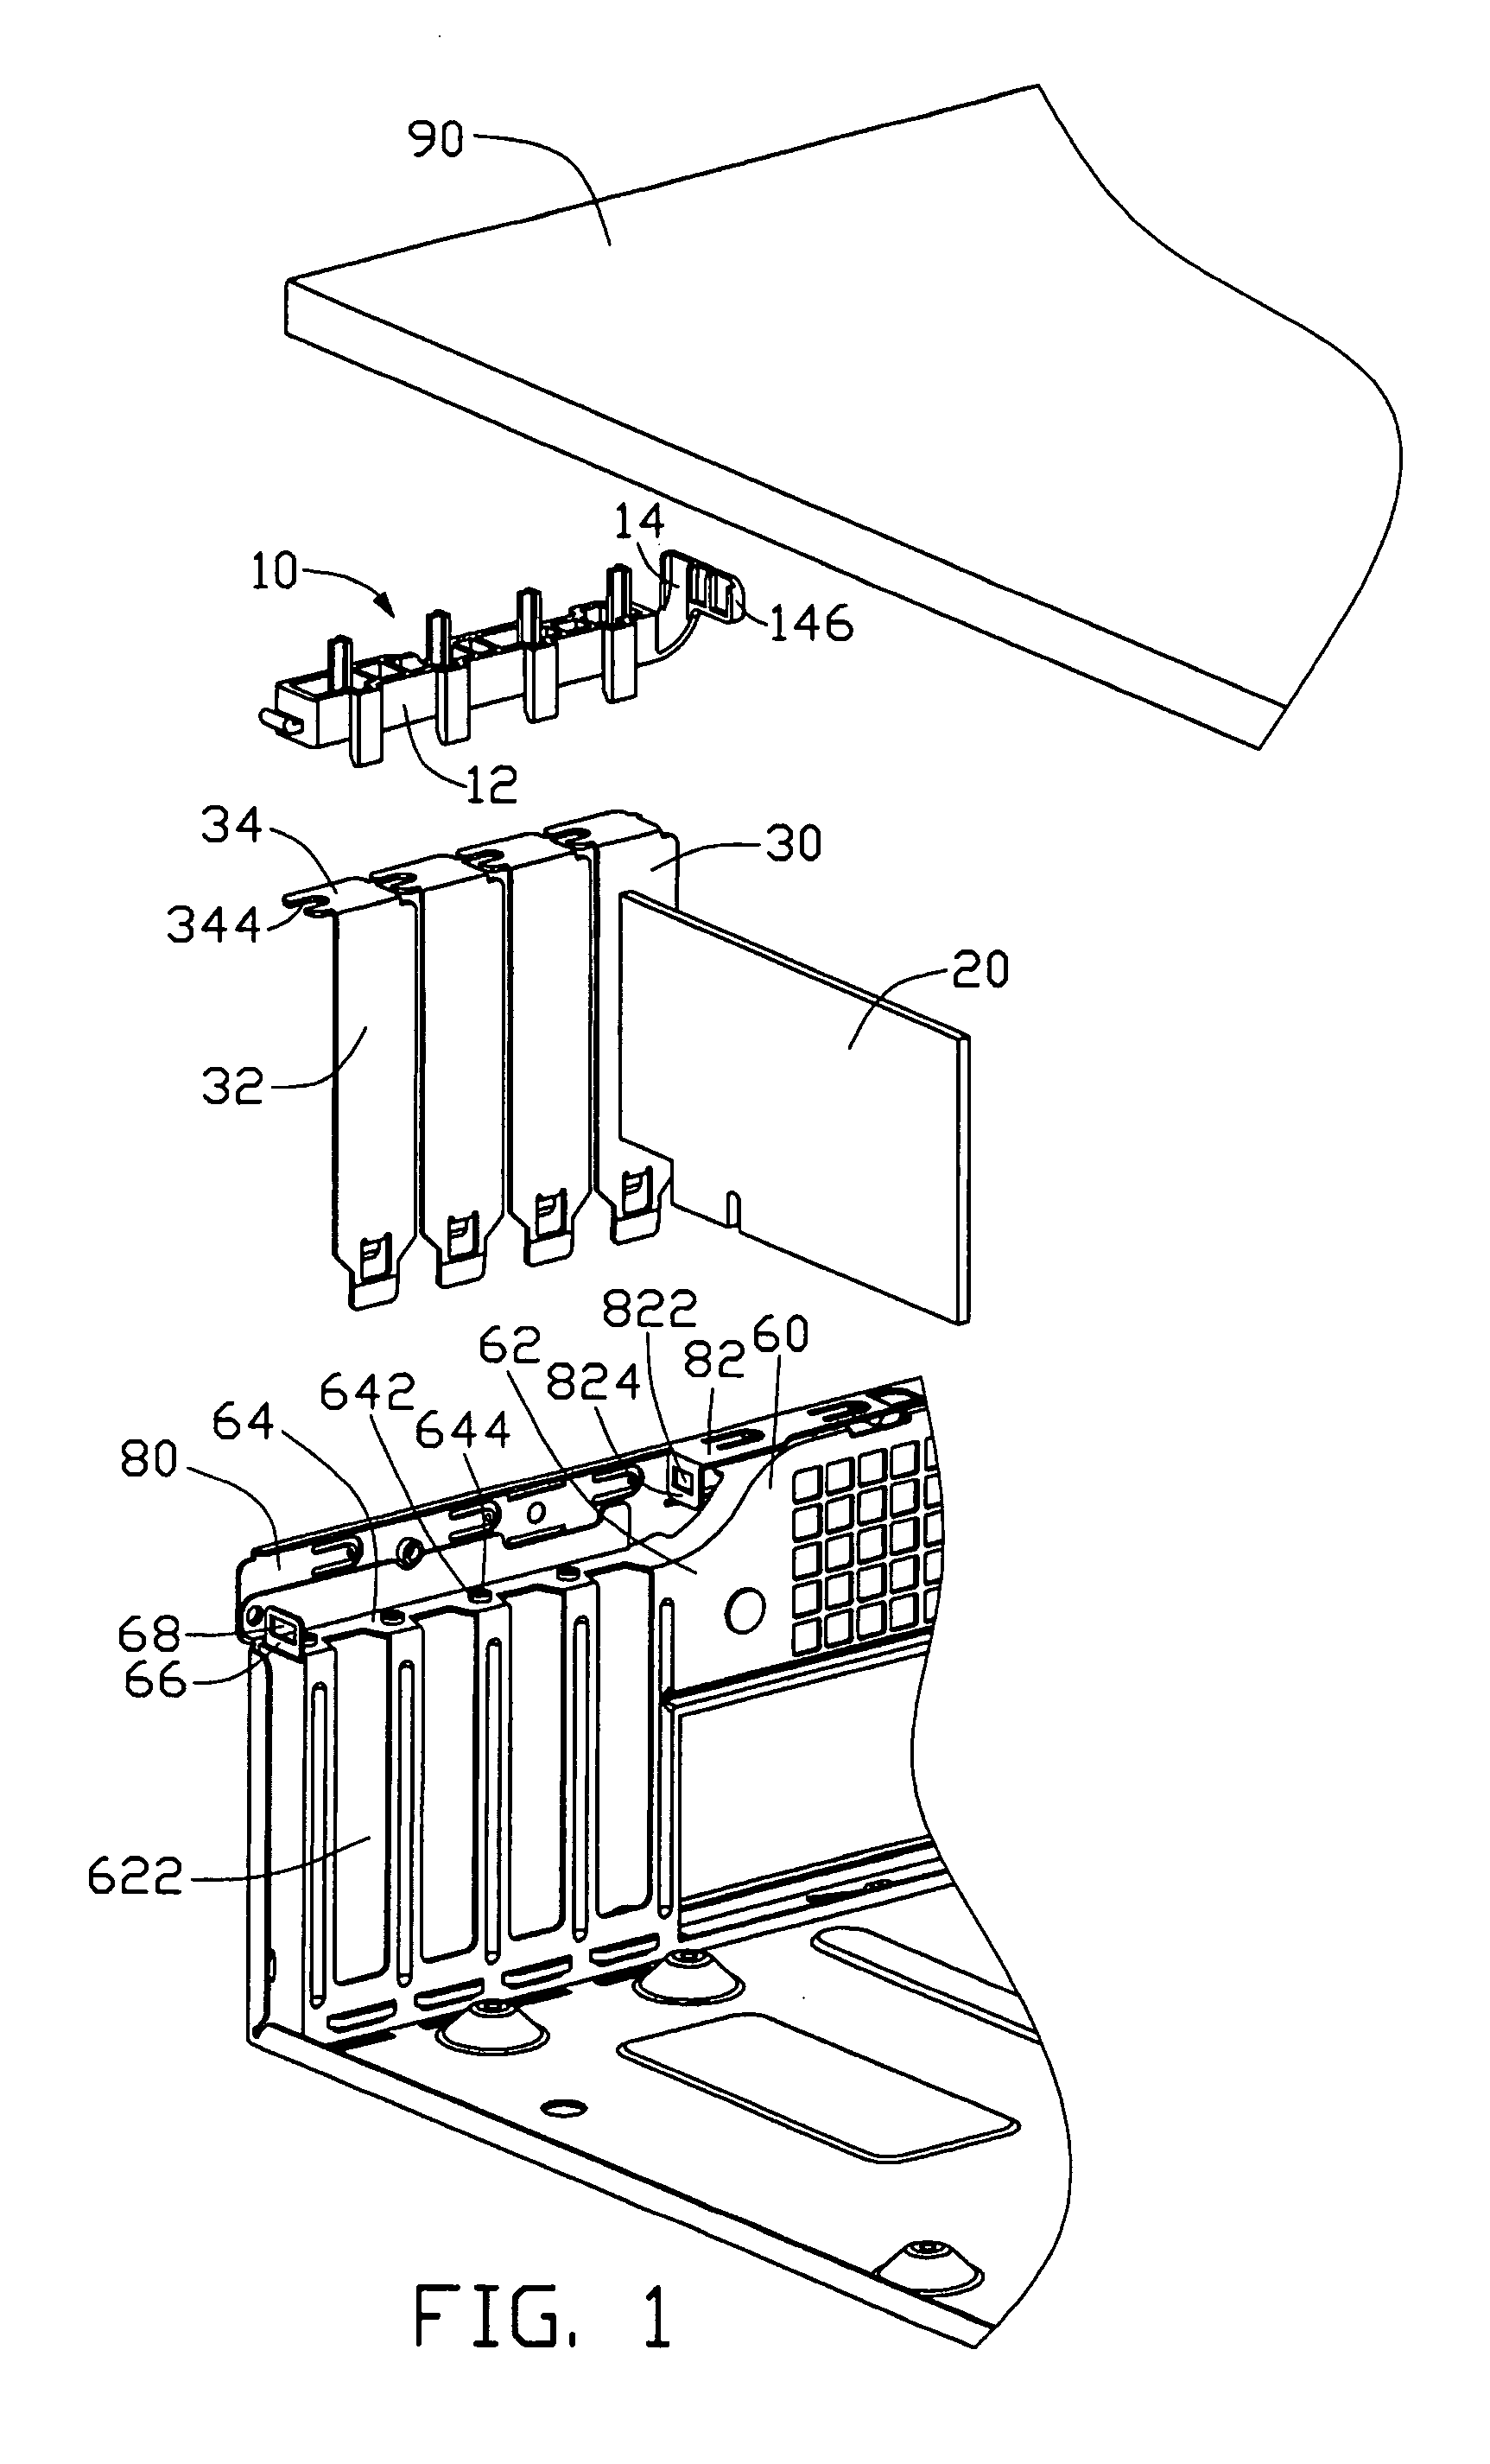 Mounting device for mounting expansion cards in computer enclosure